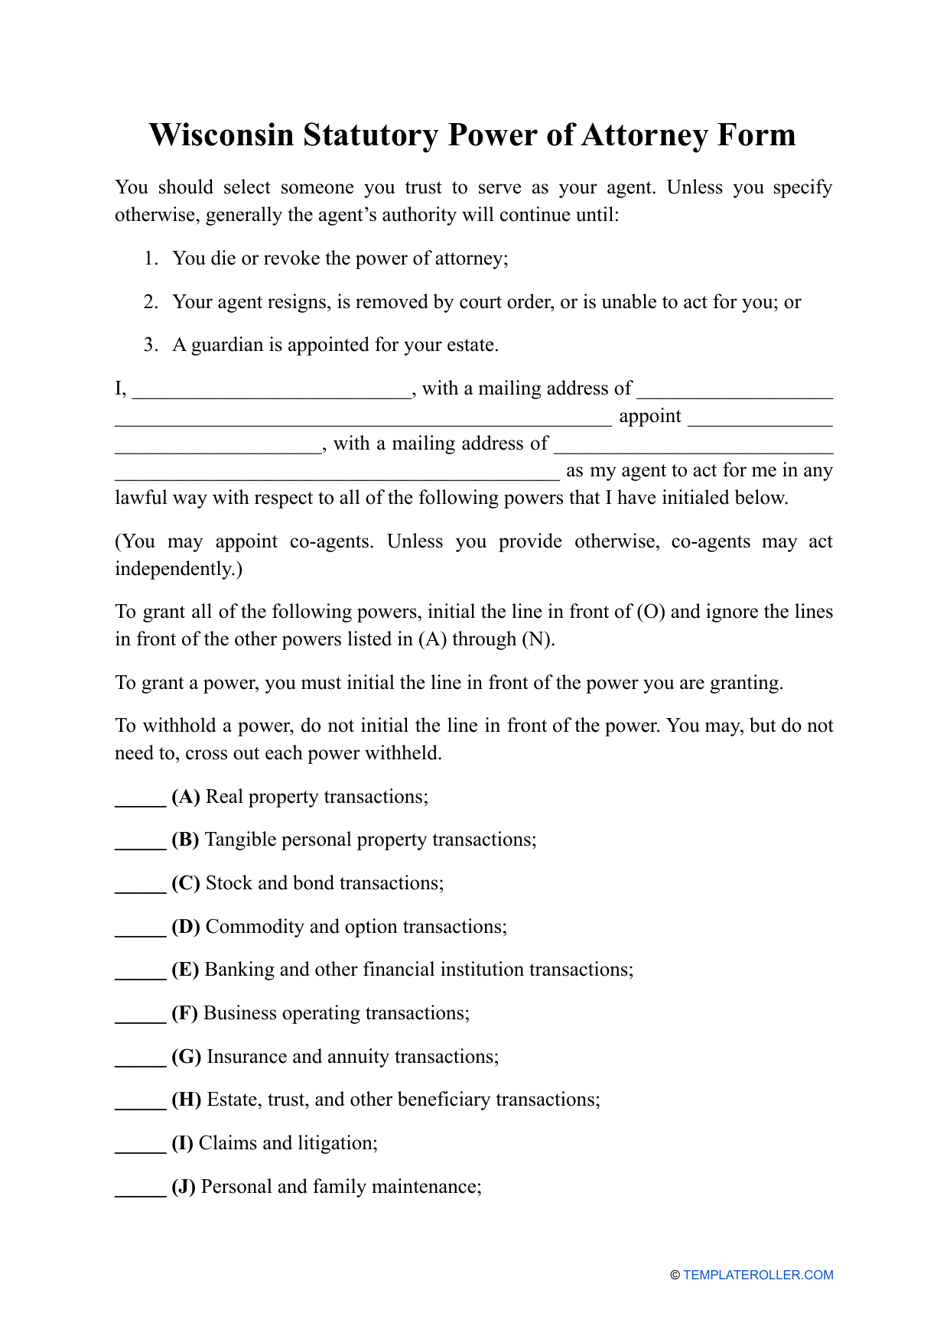 Statutory Power of Attorney Form - Wisconsin, Page 1